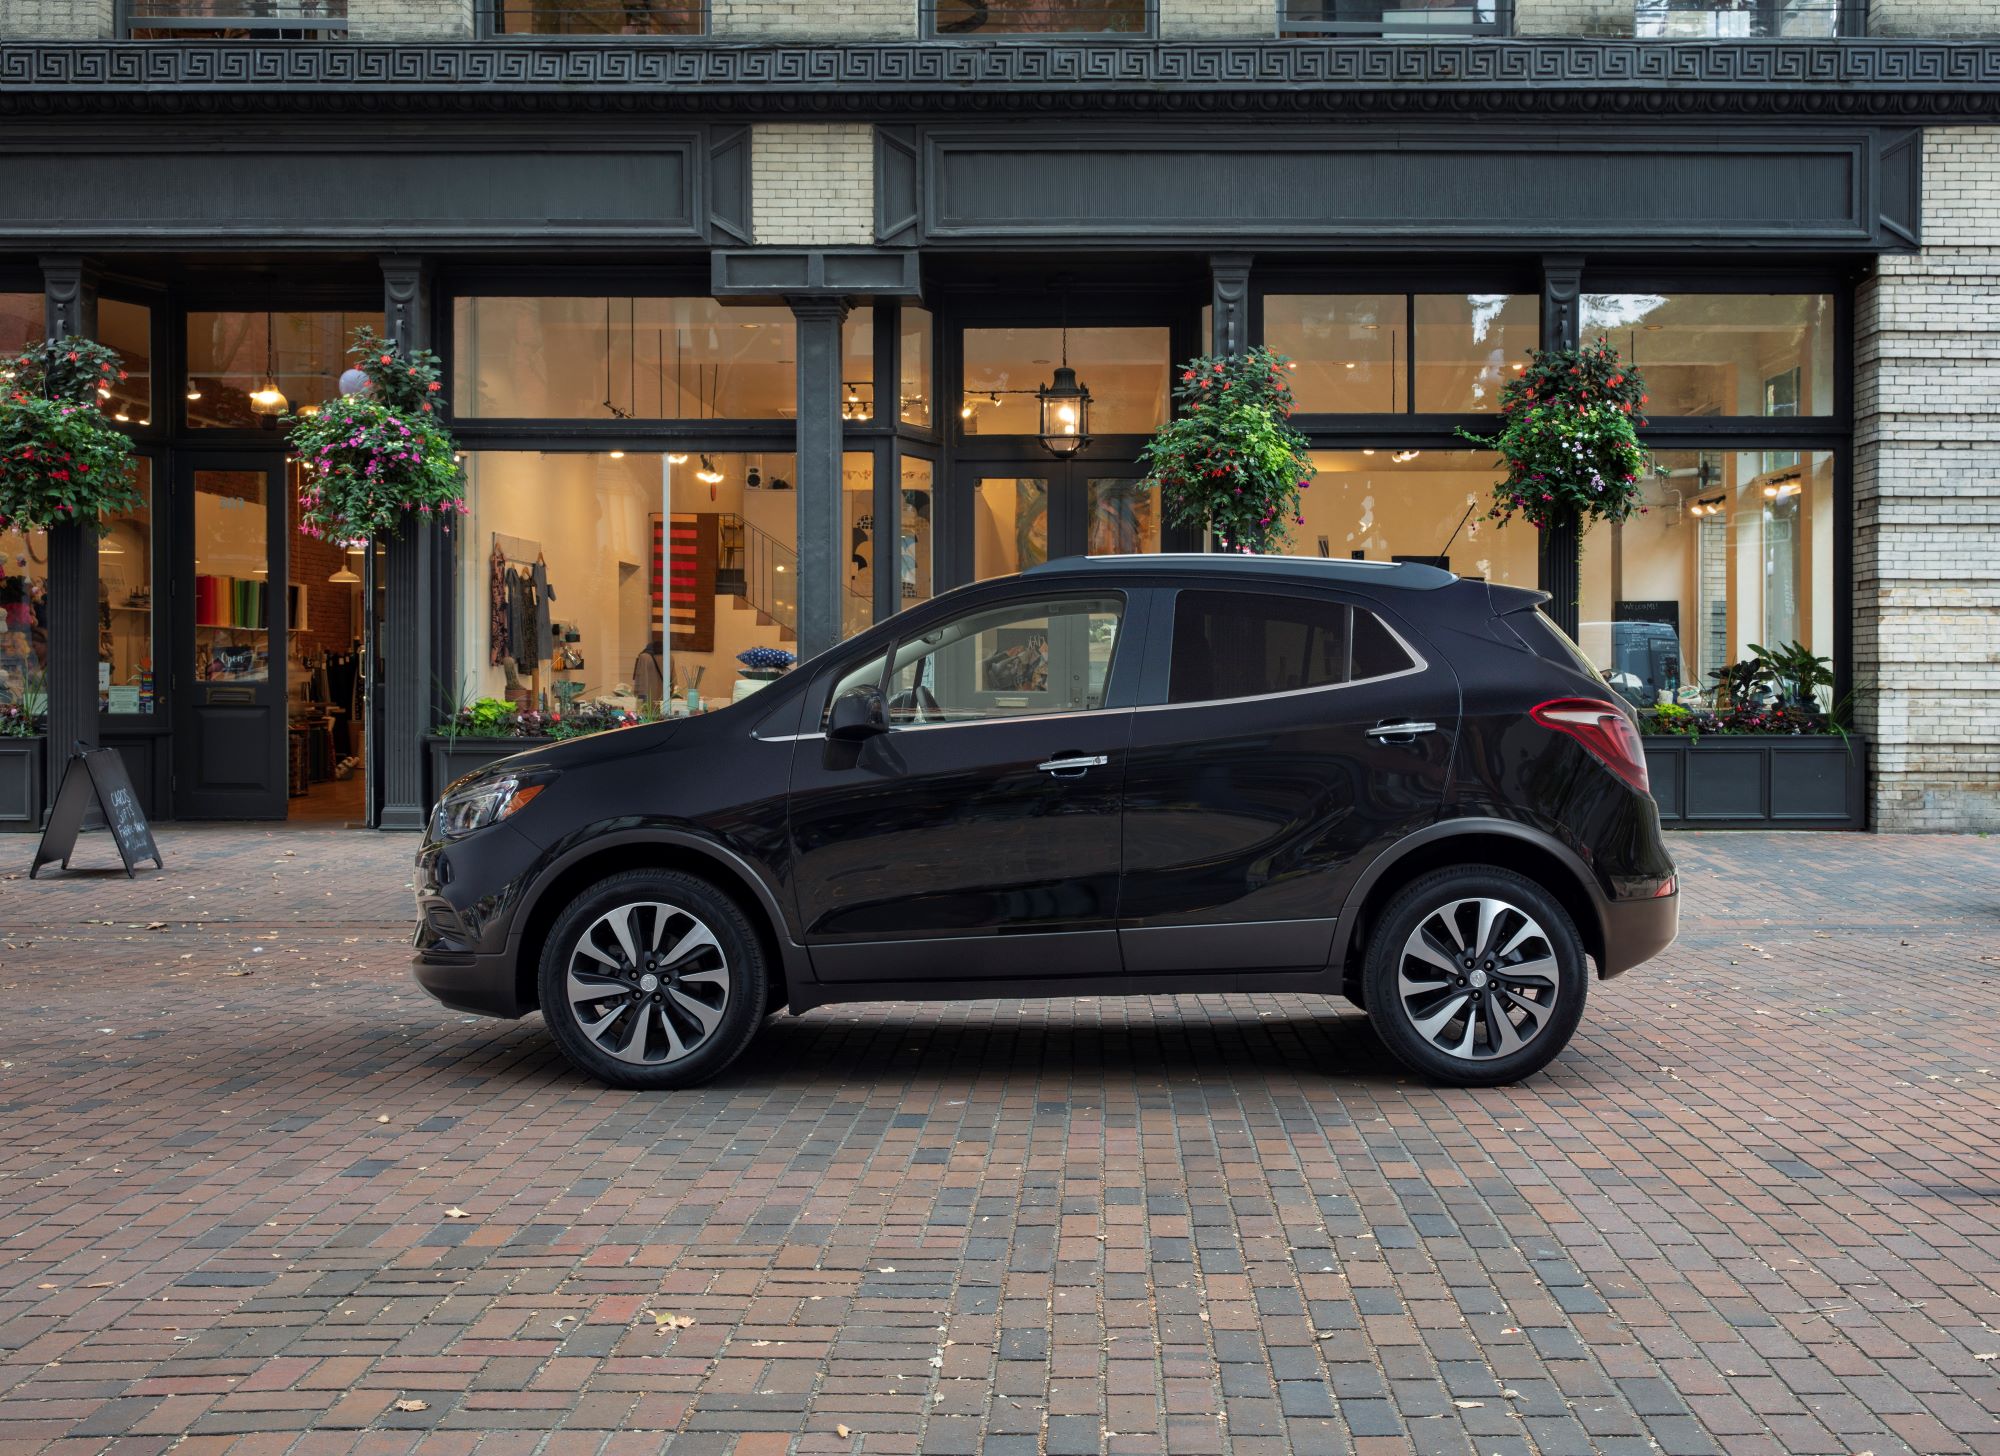 The 2022 Buick Encore Isn't Getting the Big Changes It Needs